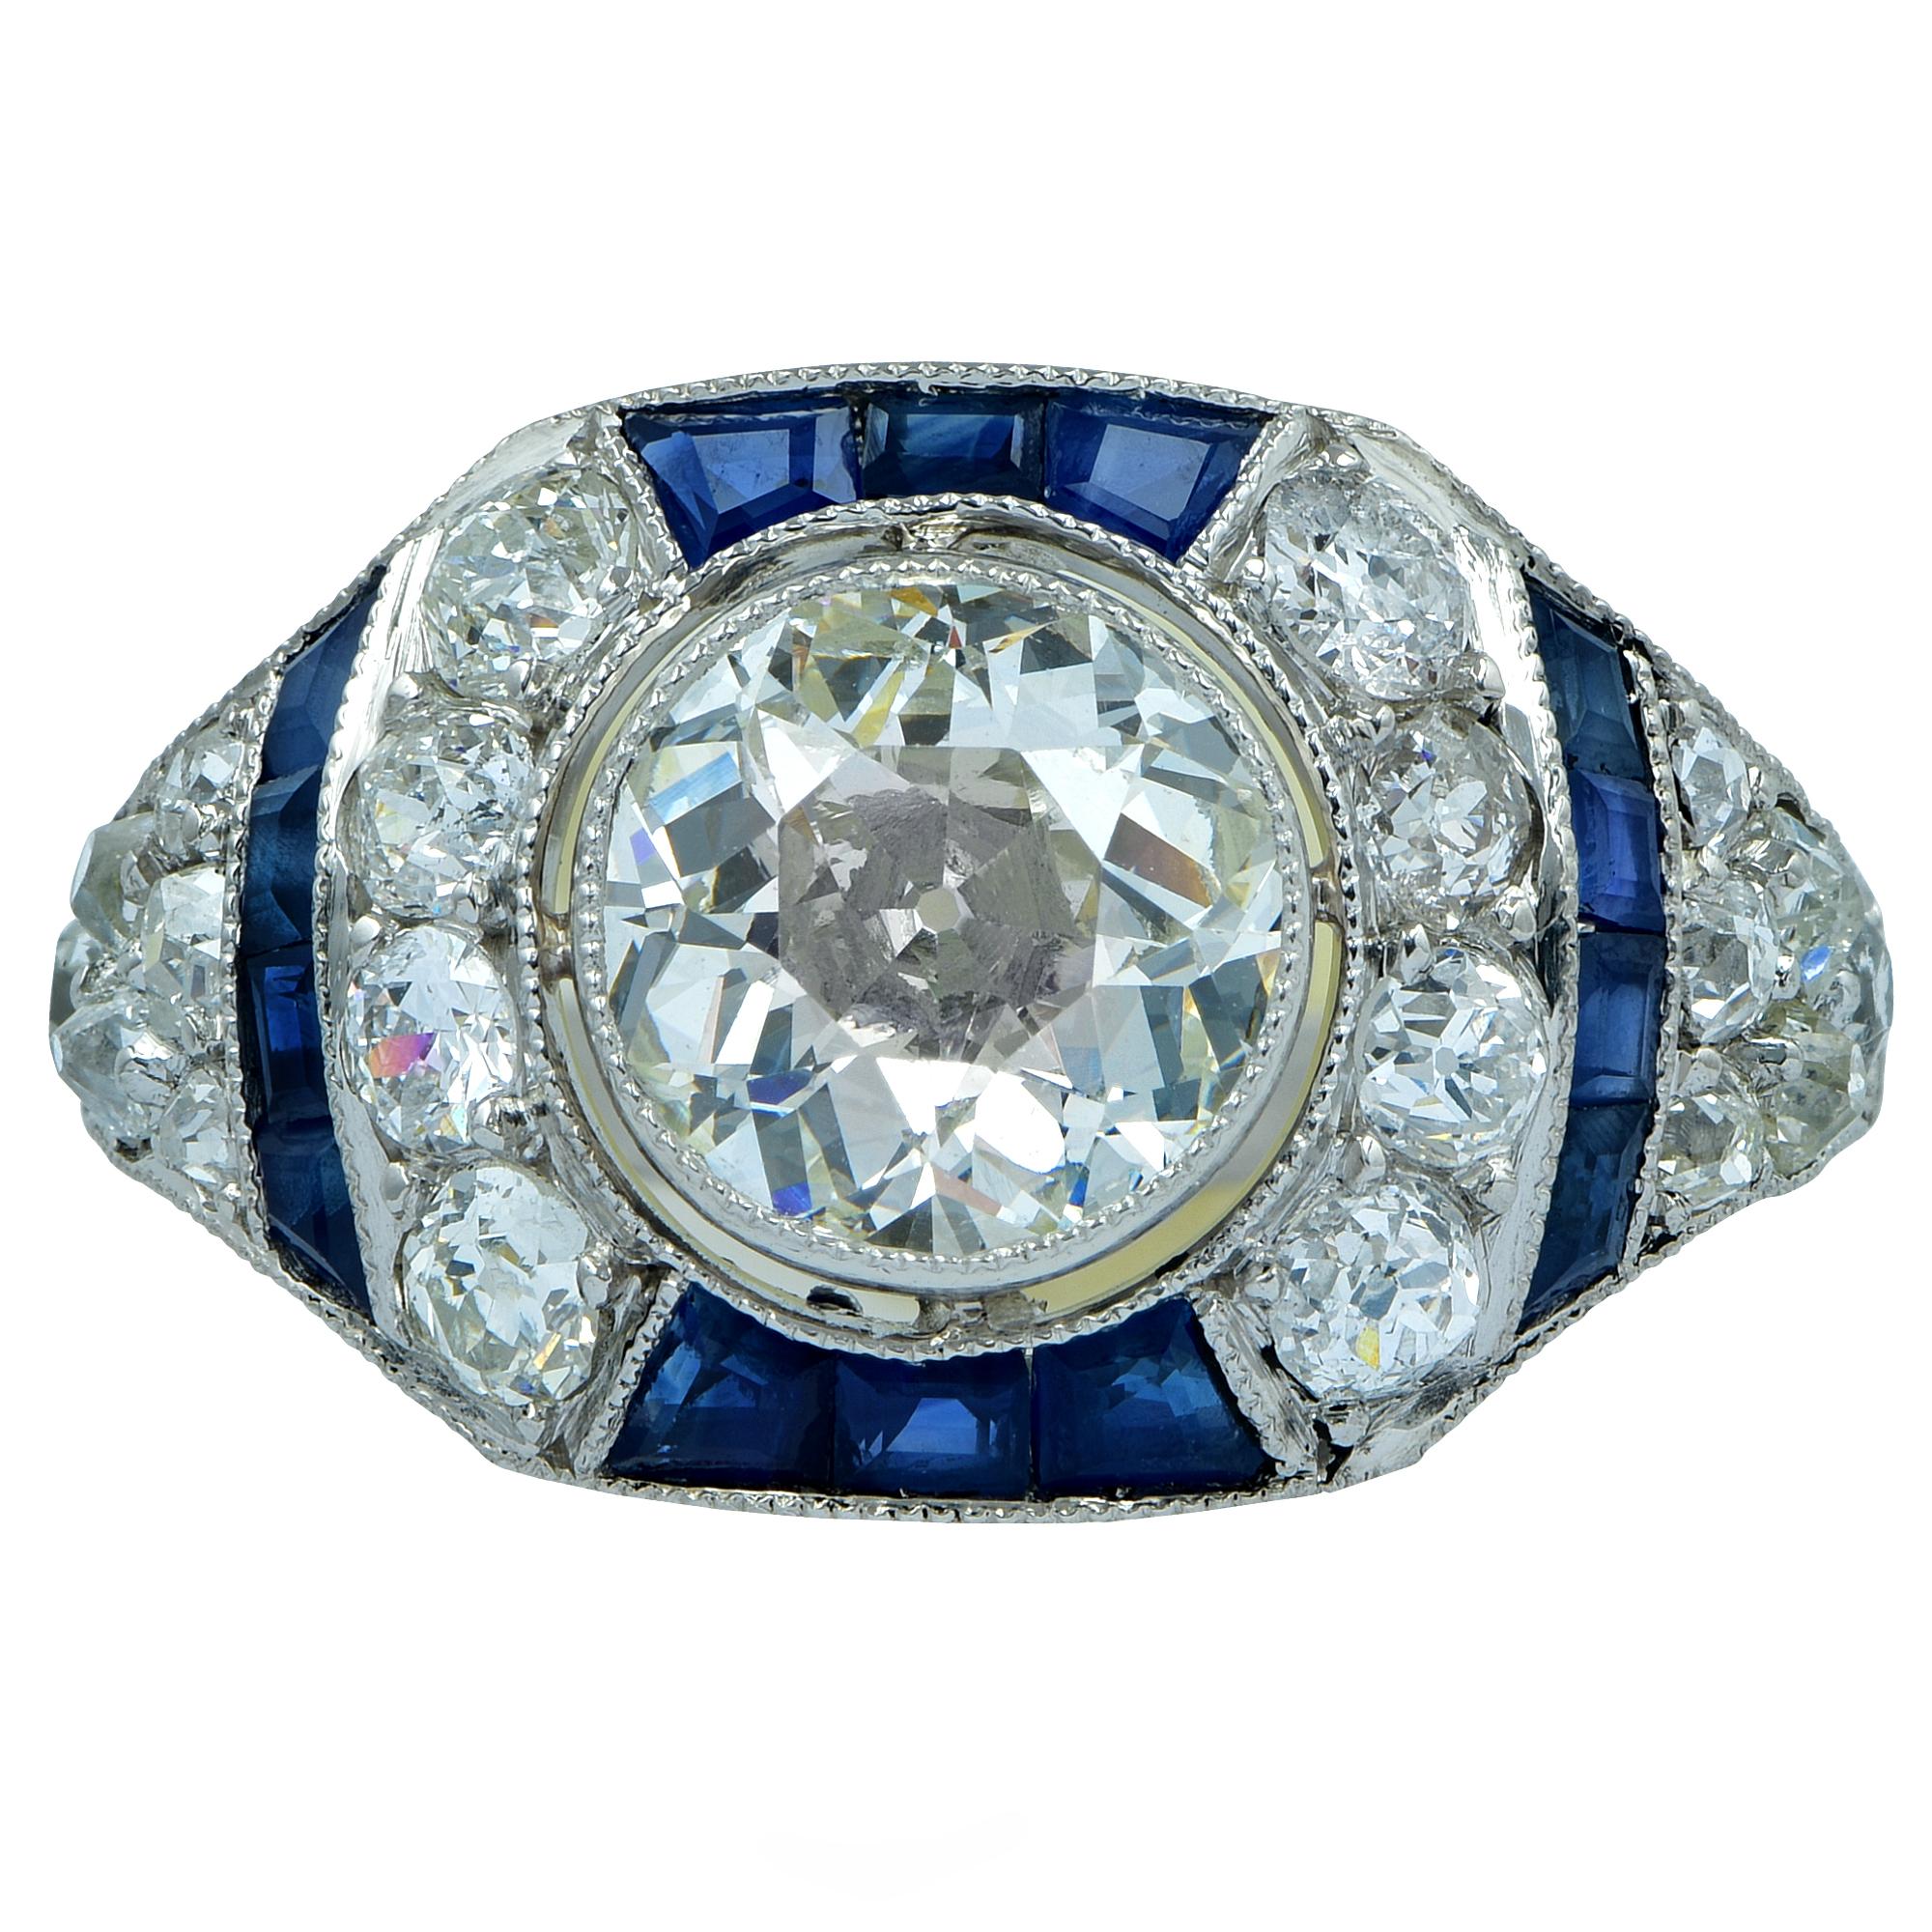 Platinum ring featuring a 1.71ct European cut diamond J color and VS clarity surrounded by 1.15cts of European cut diamonds and 14 royal blue sapphires weighing .70cts total. 

Our pieces are all accompanied by an appraisal performed by one of our